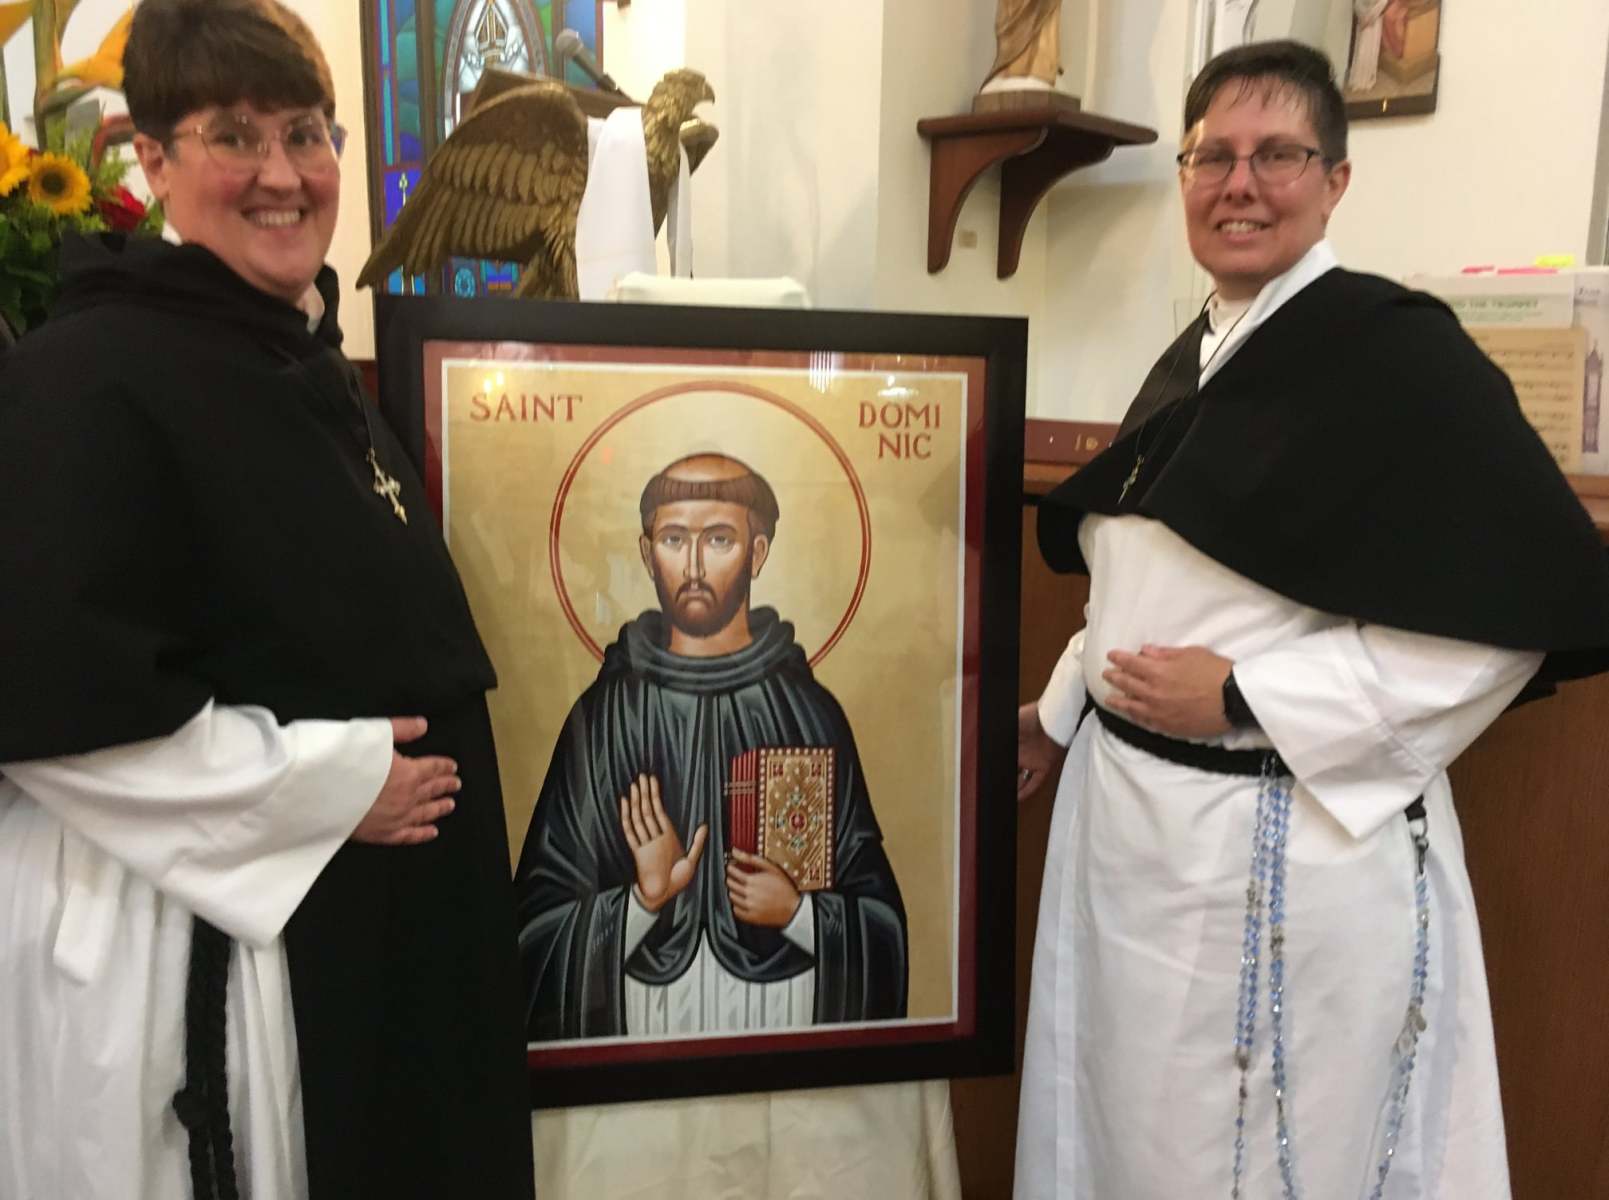 Our Common Life – Anglican Dominicans